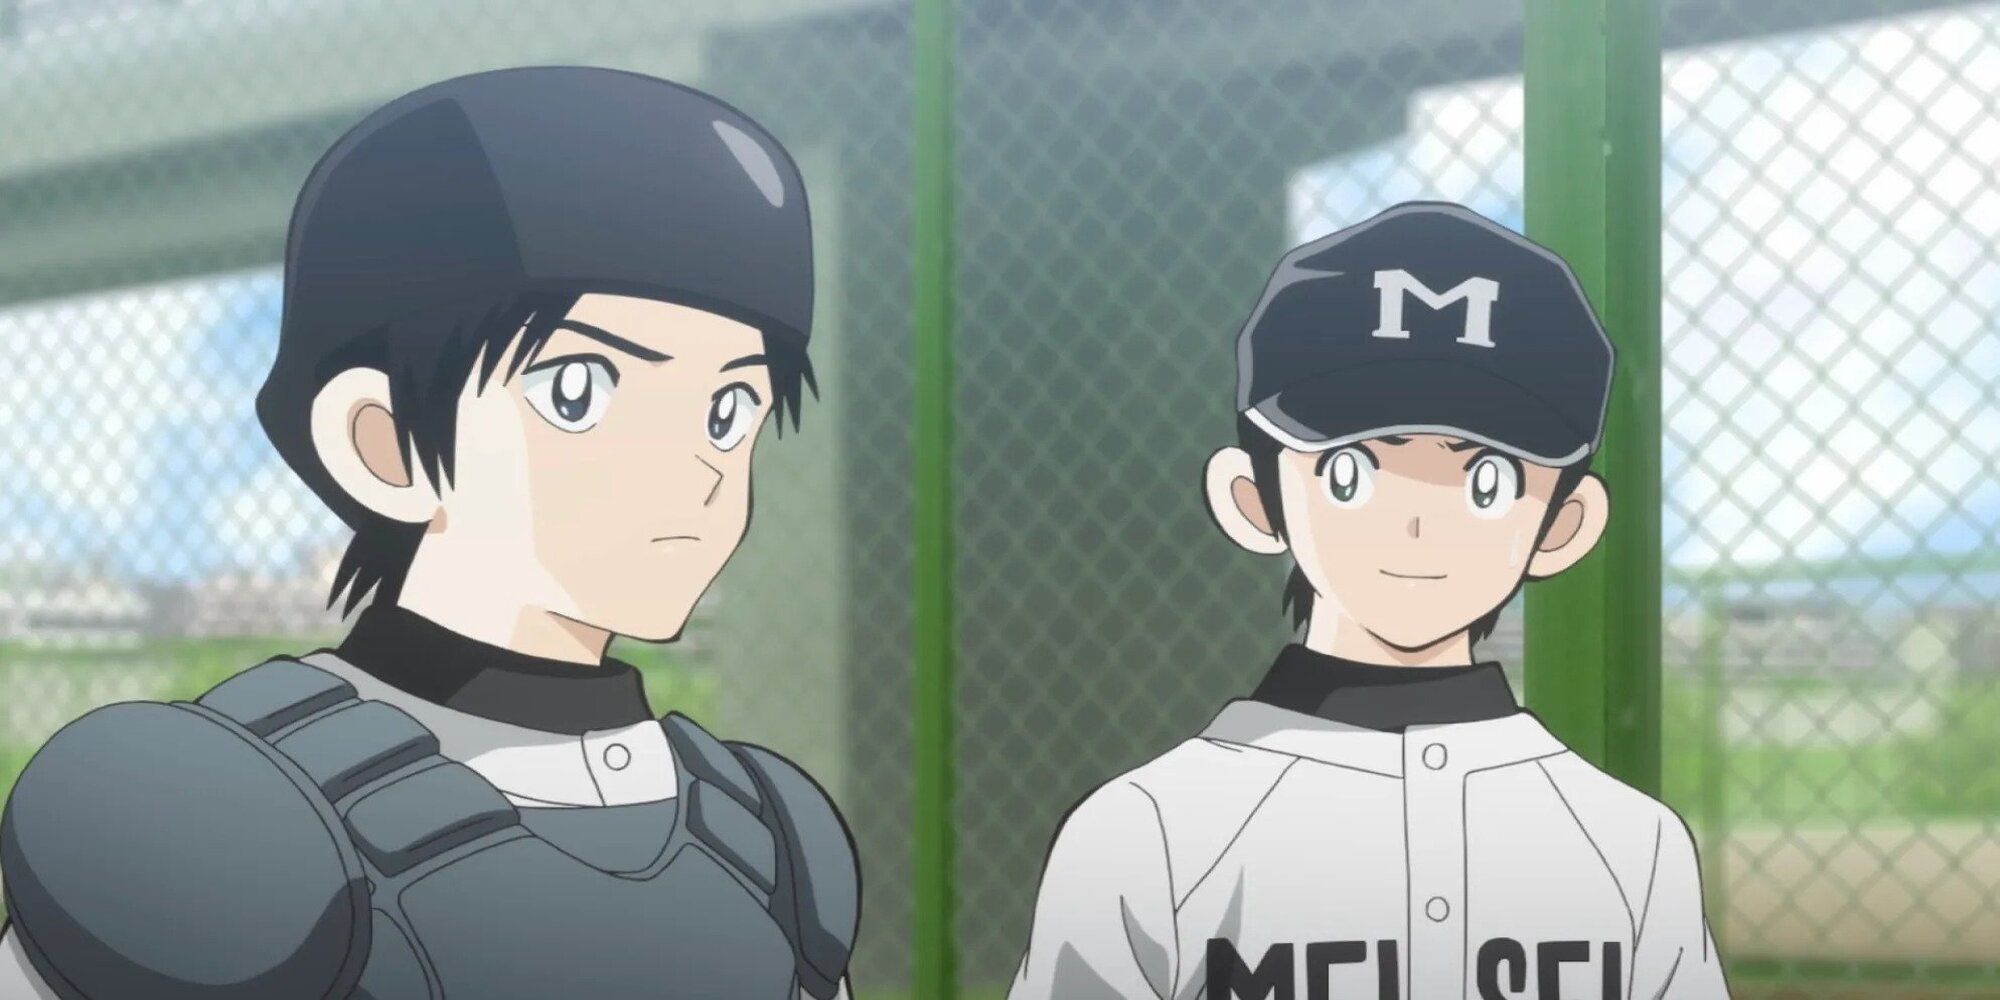 Two boys stand next to each other in baseball uniforms in the Mix anime image.